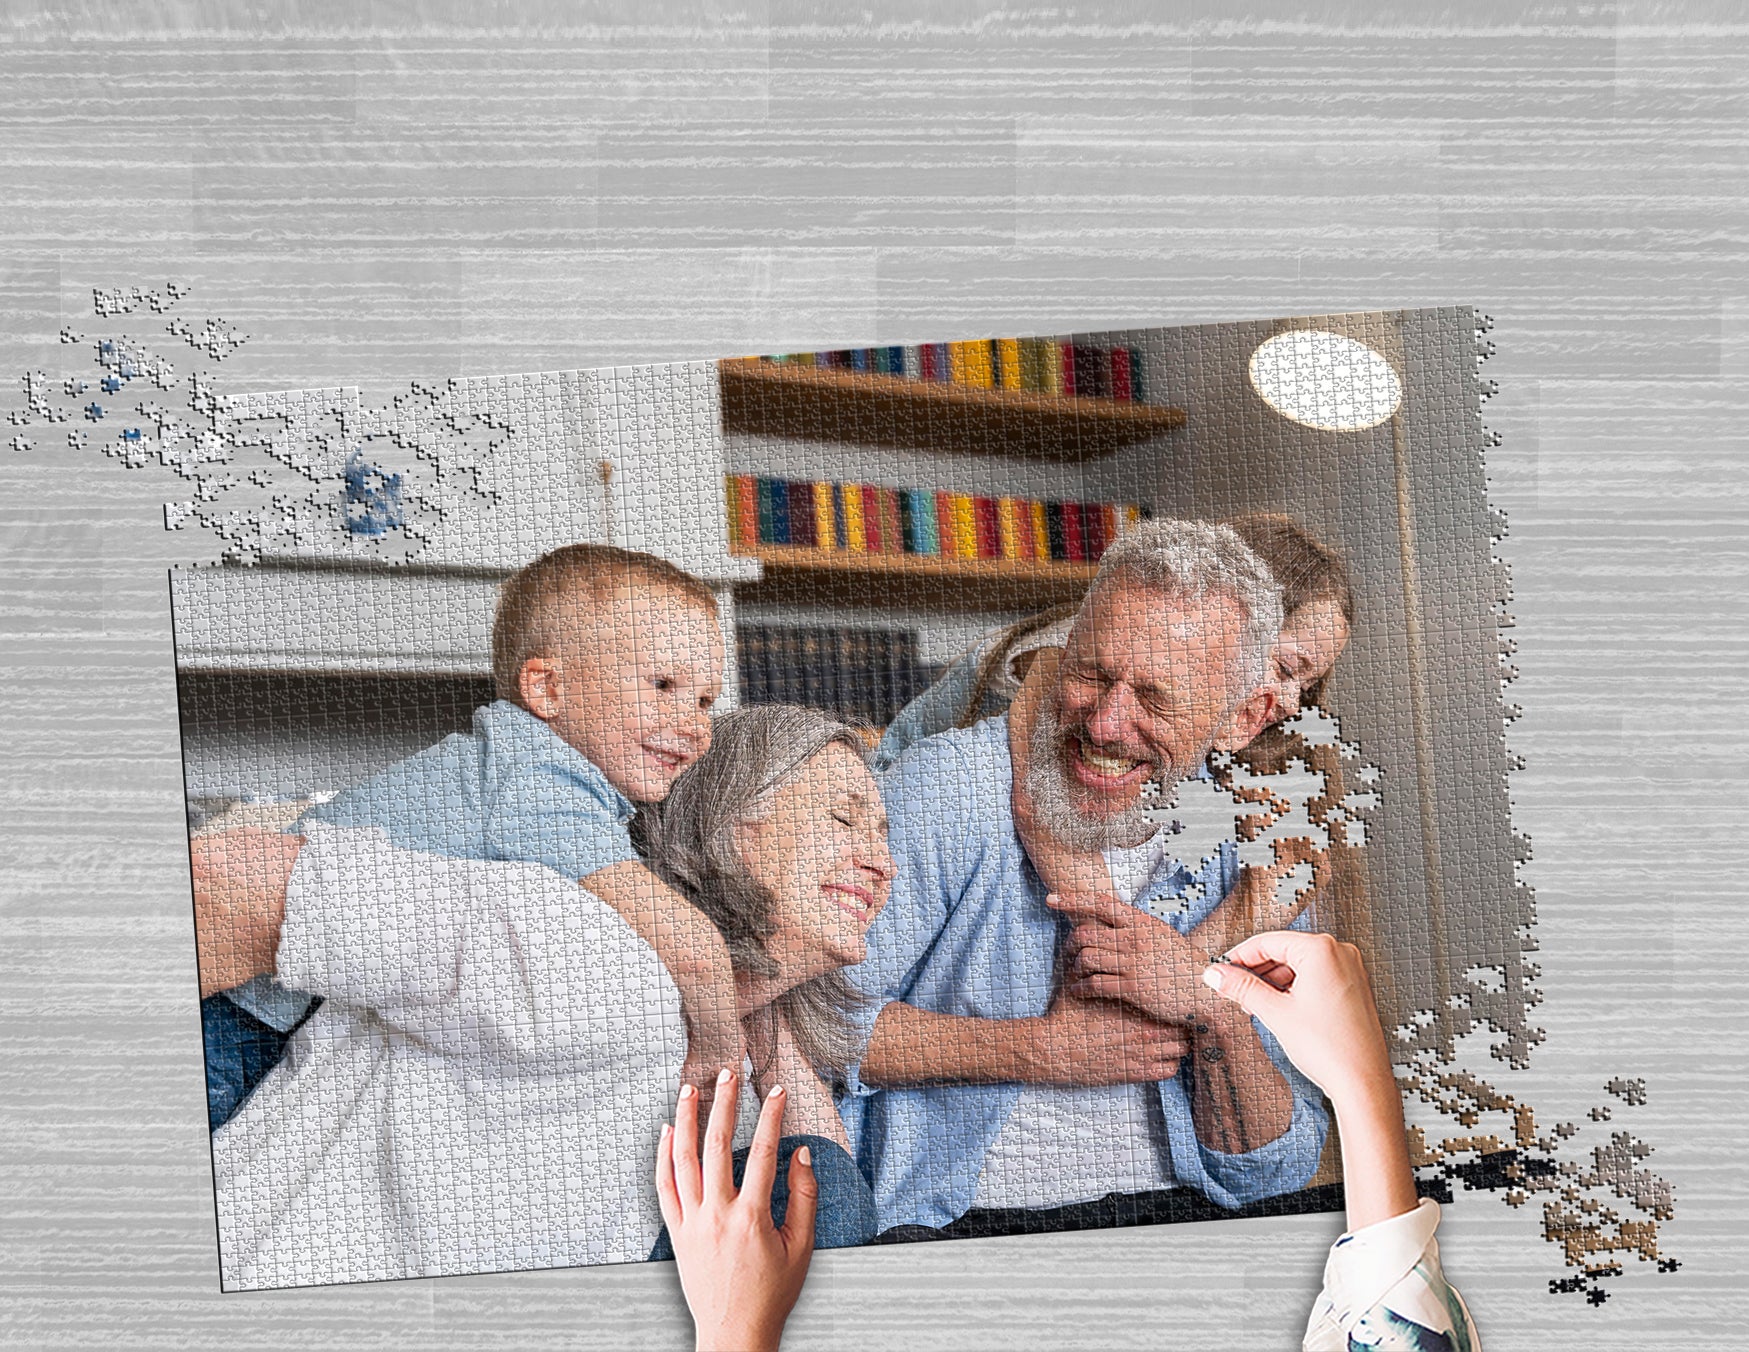 Photo puzzle 3000 pieces 85 x 116 cm / 33.4 x 45.6 inches in a box –